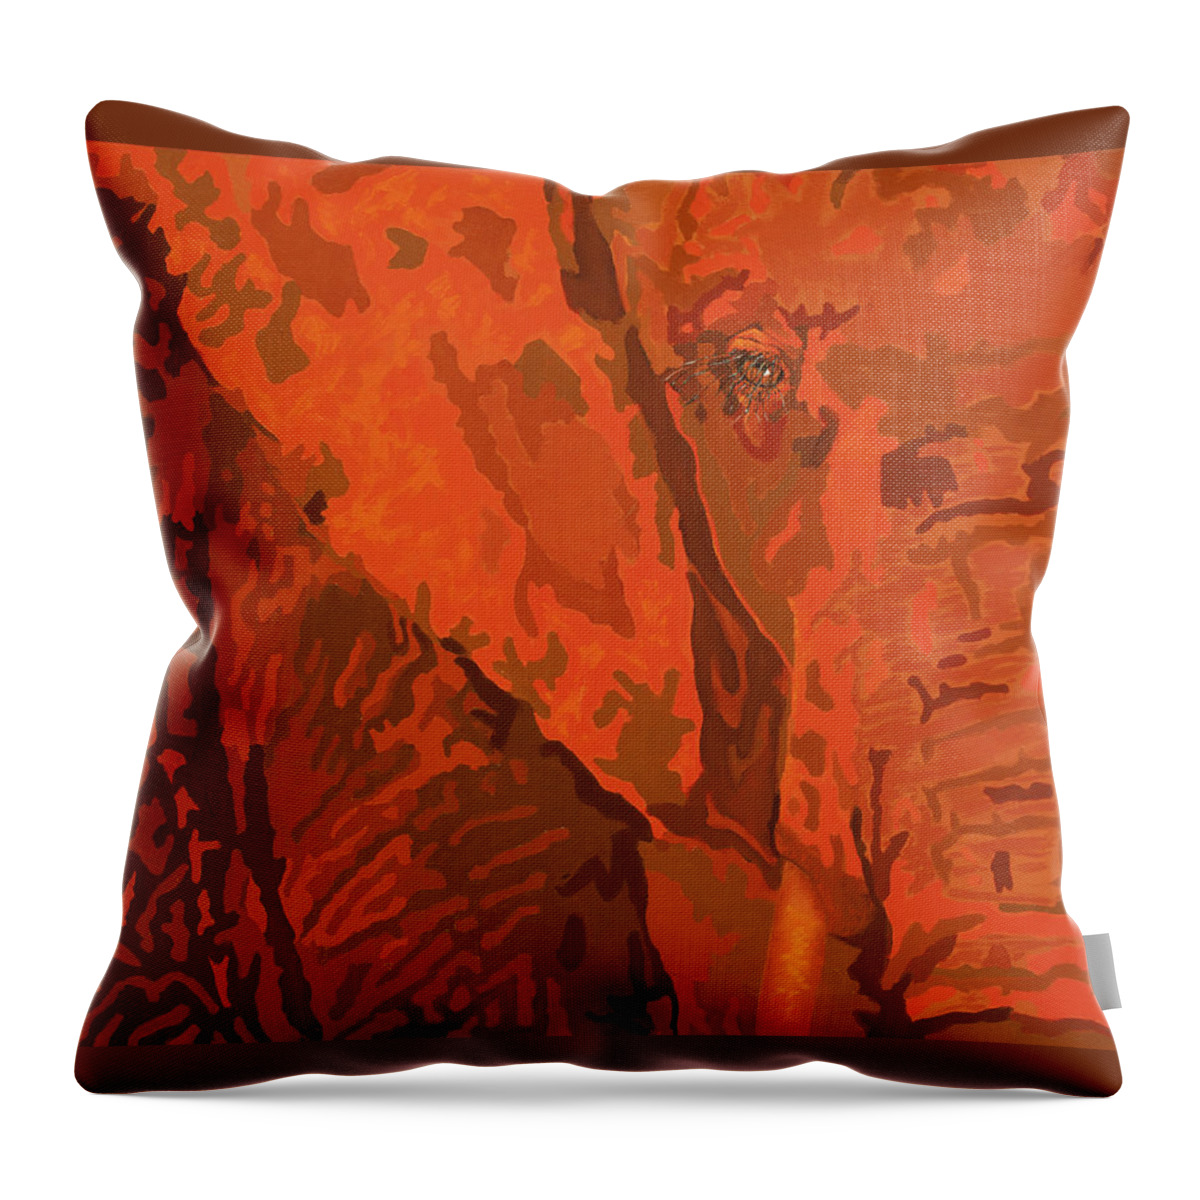 Elephant Throw Pillow featuring the painting Do You See Me? by Cheryl Bowman